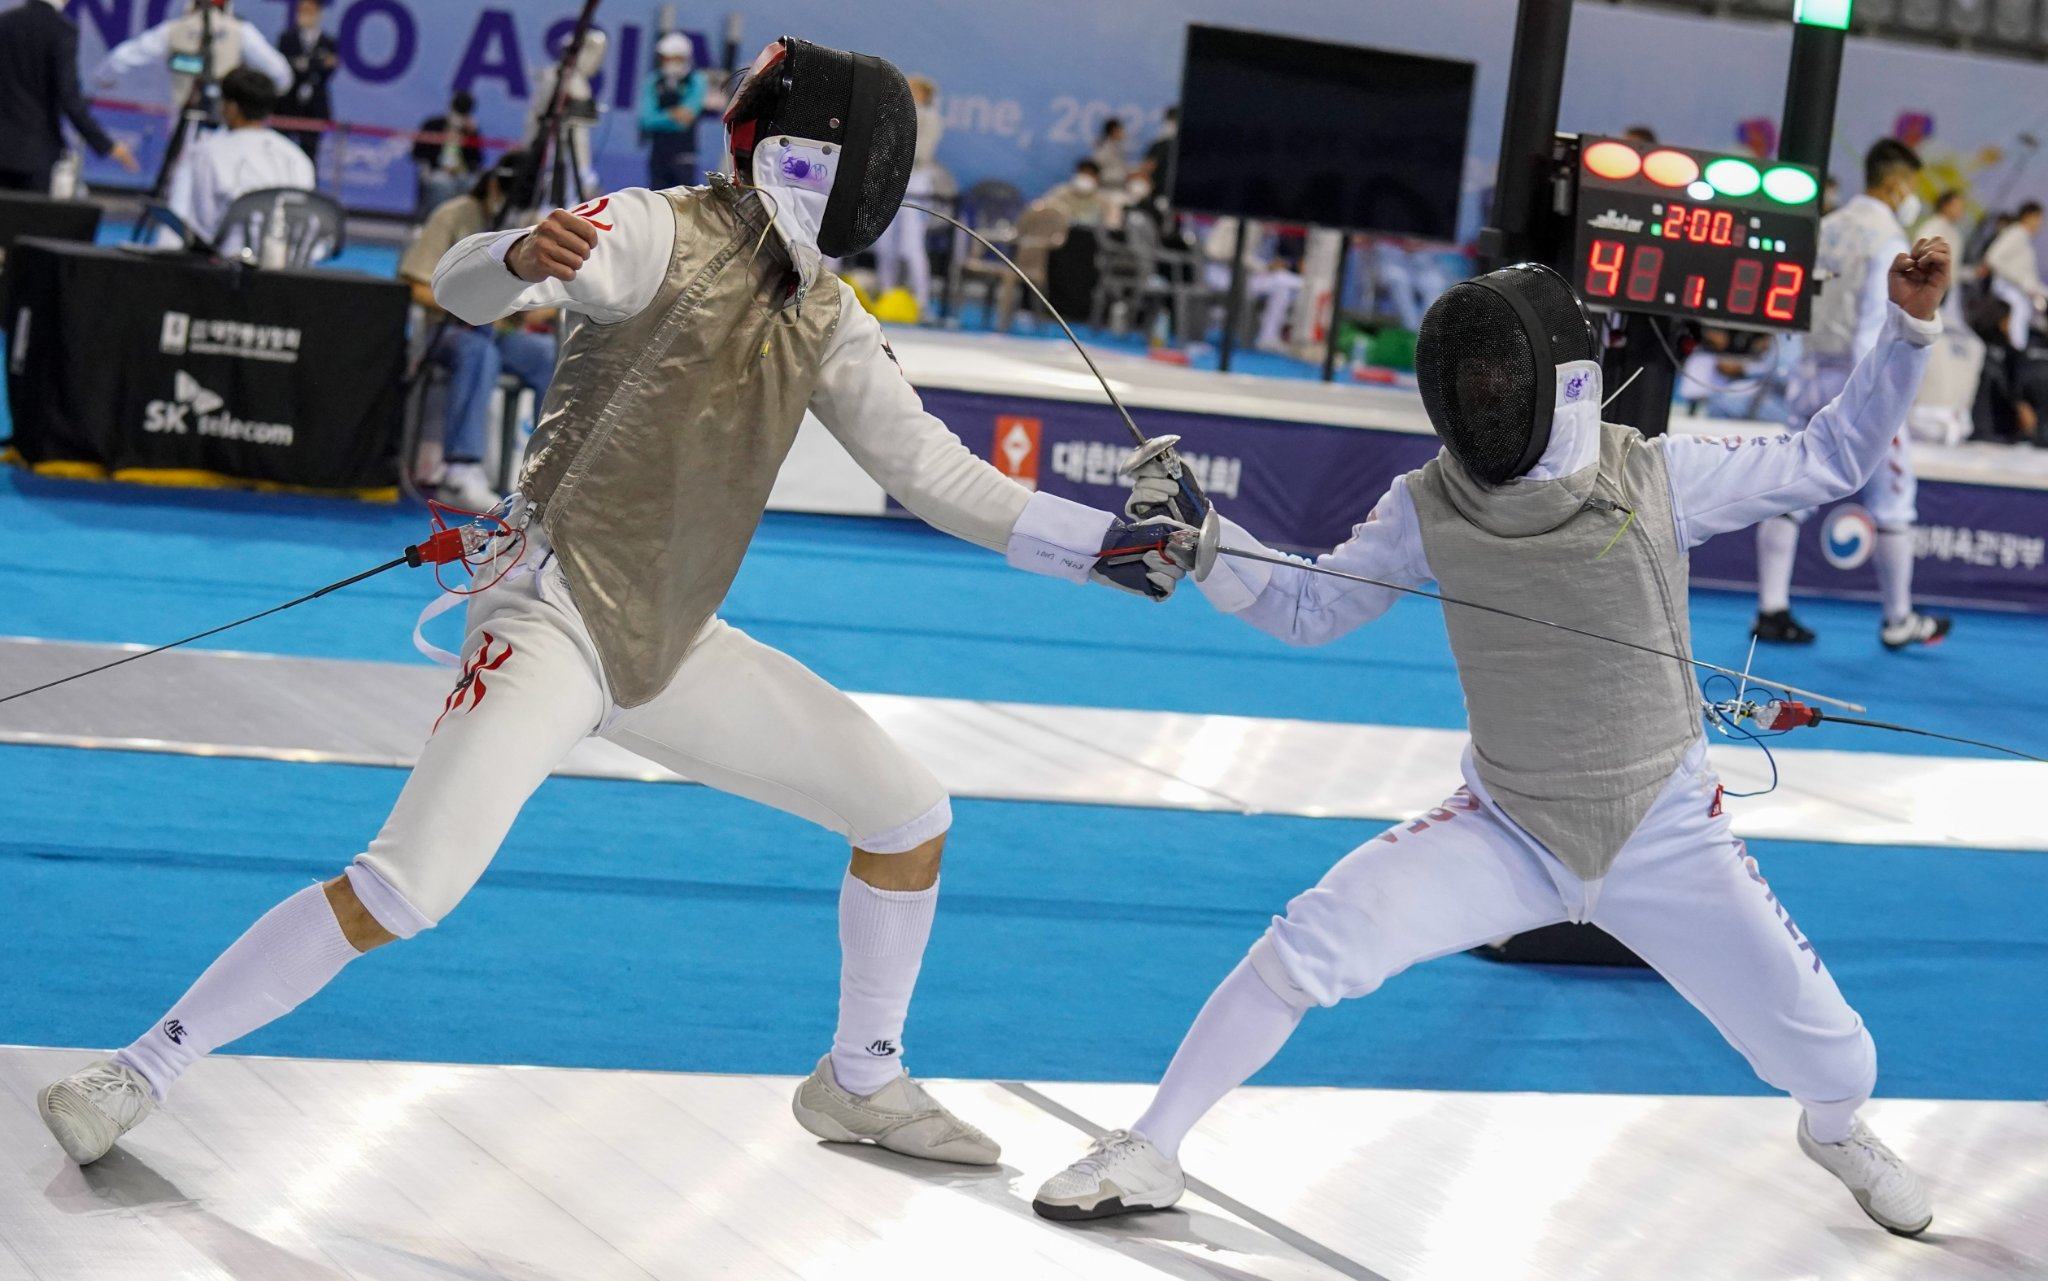 Ryan Choi (left) has an outstanding performance against the Koreans but could not save Hong Kong from defeat as they lost 45-42 in the men’s team foil semi-finals at the Asian Championships in Seoul. Photo: FIE